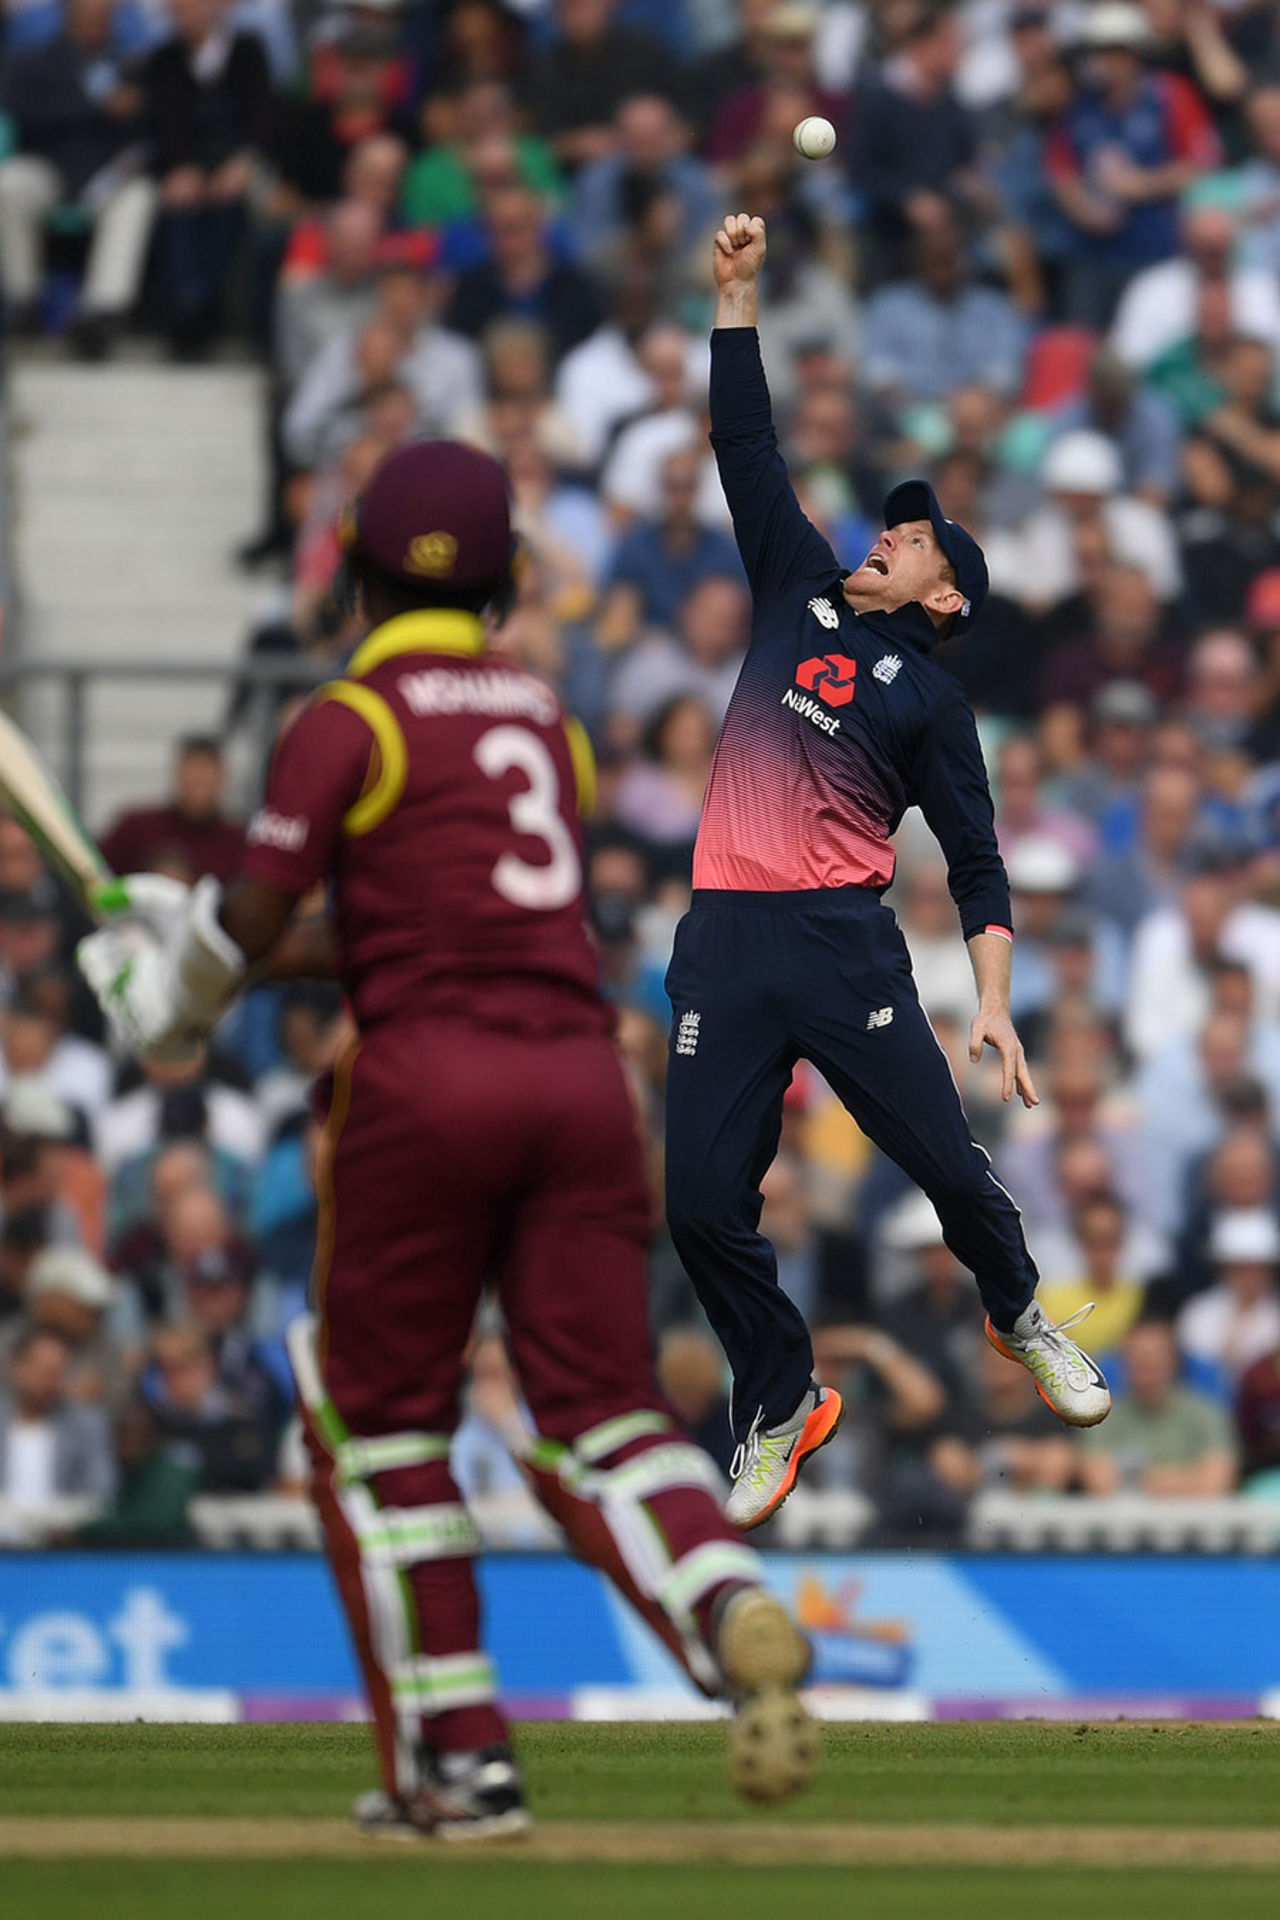 Eoin Morgan just failed to hold a sharp chance above his head, England v West Indies, 4th ODI, The Oval, September 27, 2017